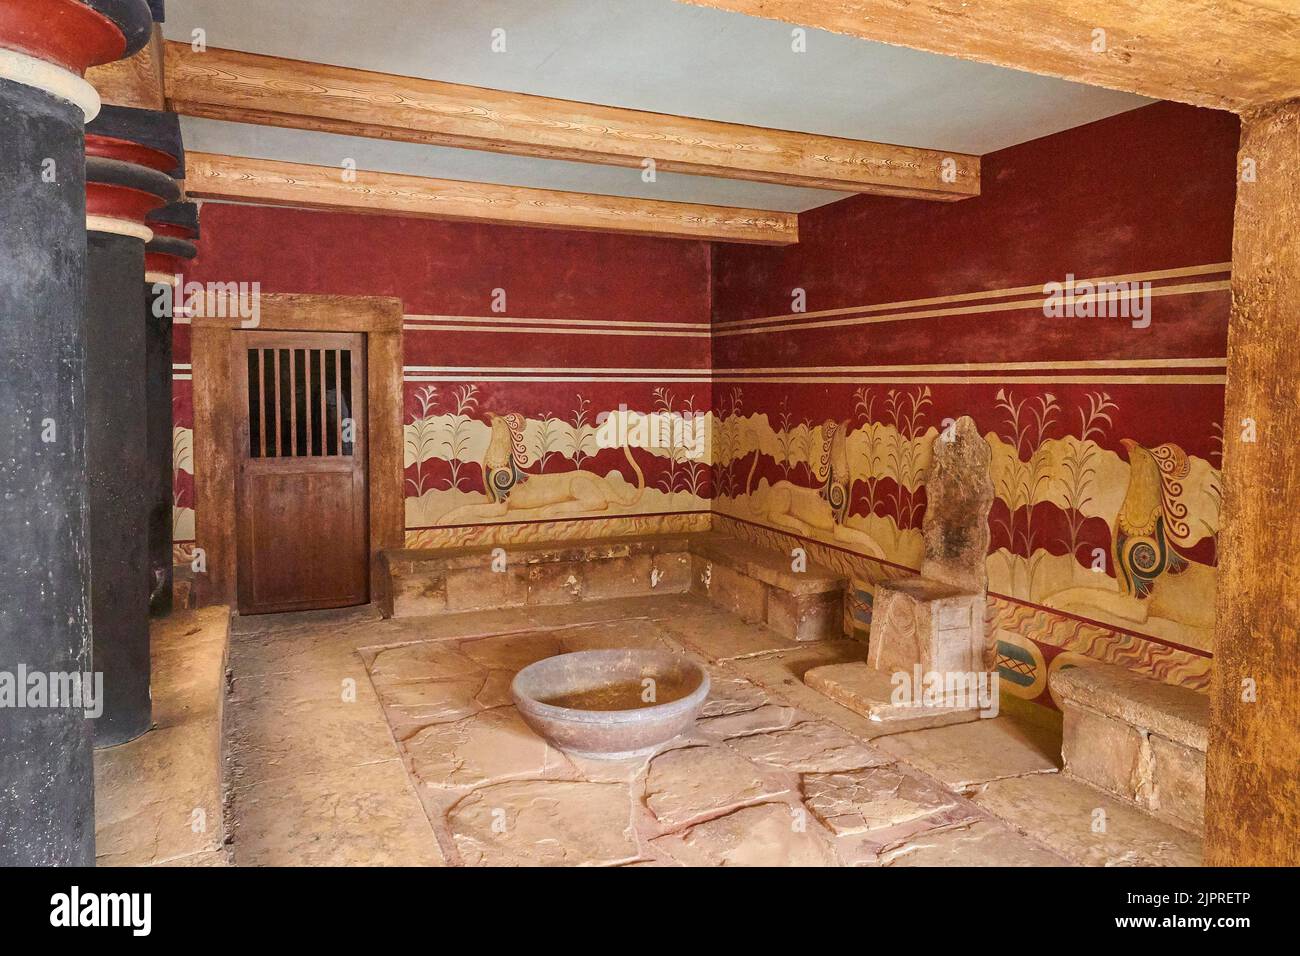 Throne room, griffin frescoes, throne, porphyry basin, black round columns, wooden door, Palace of Knossos, Heraklion, Central Crete, Island of Stock Photo